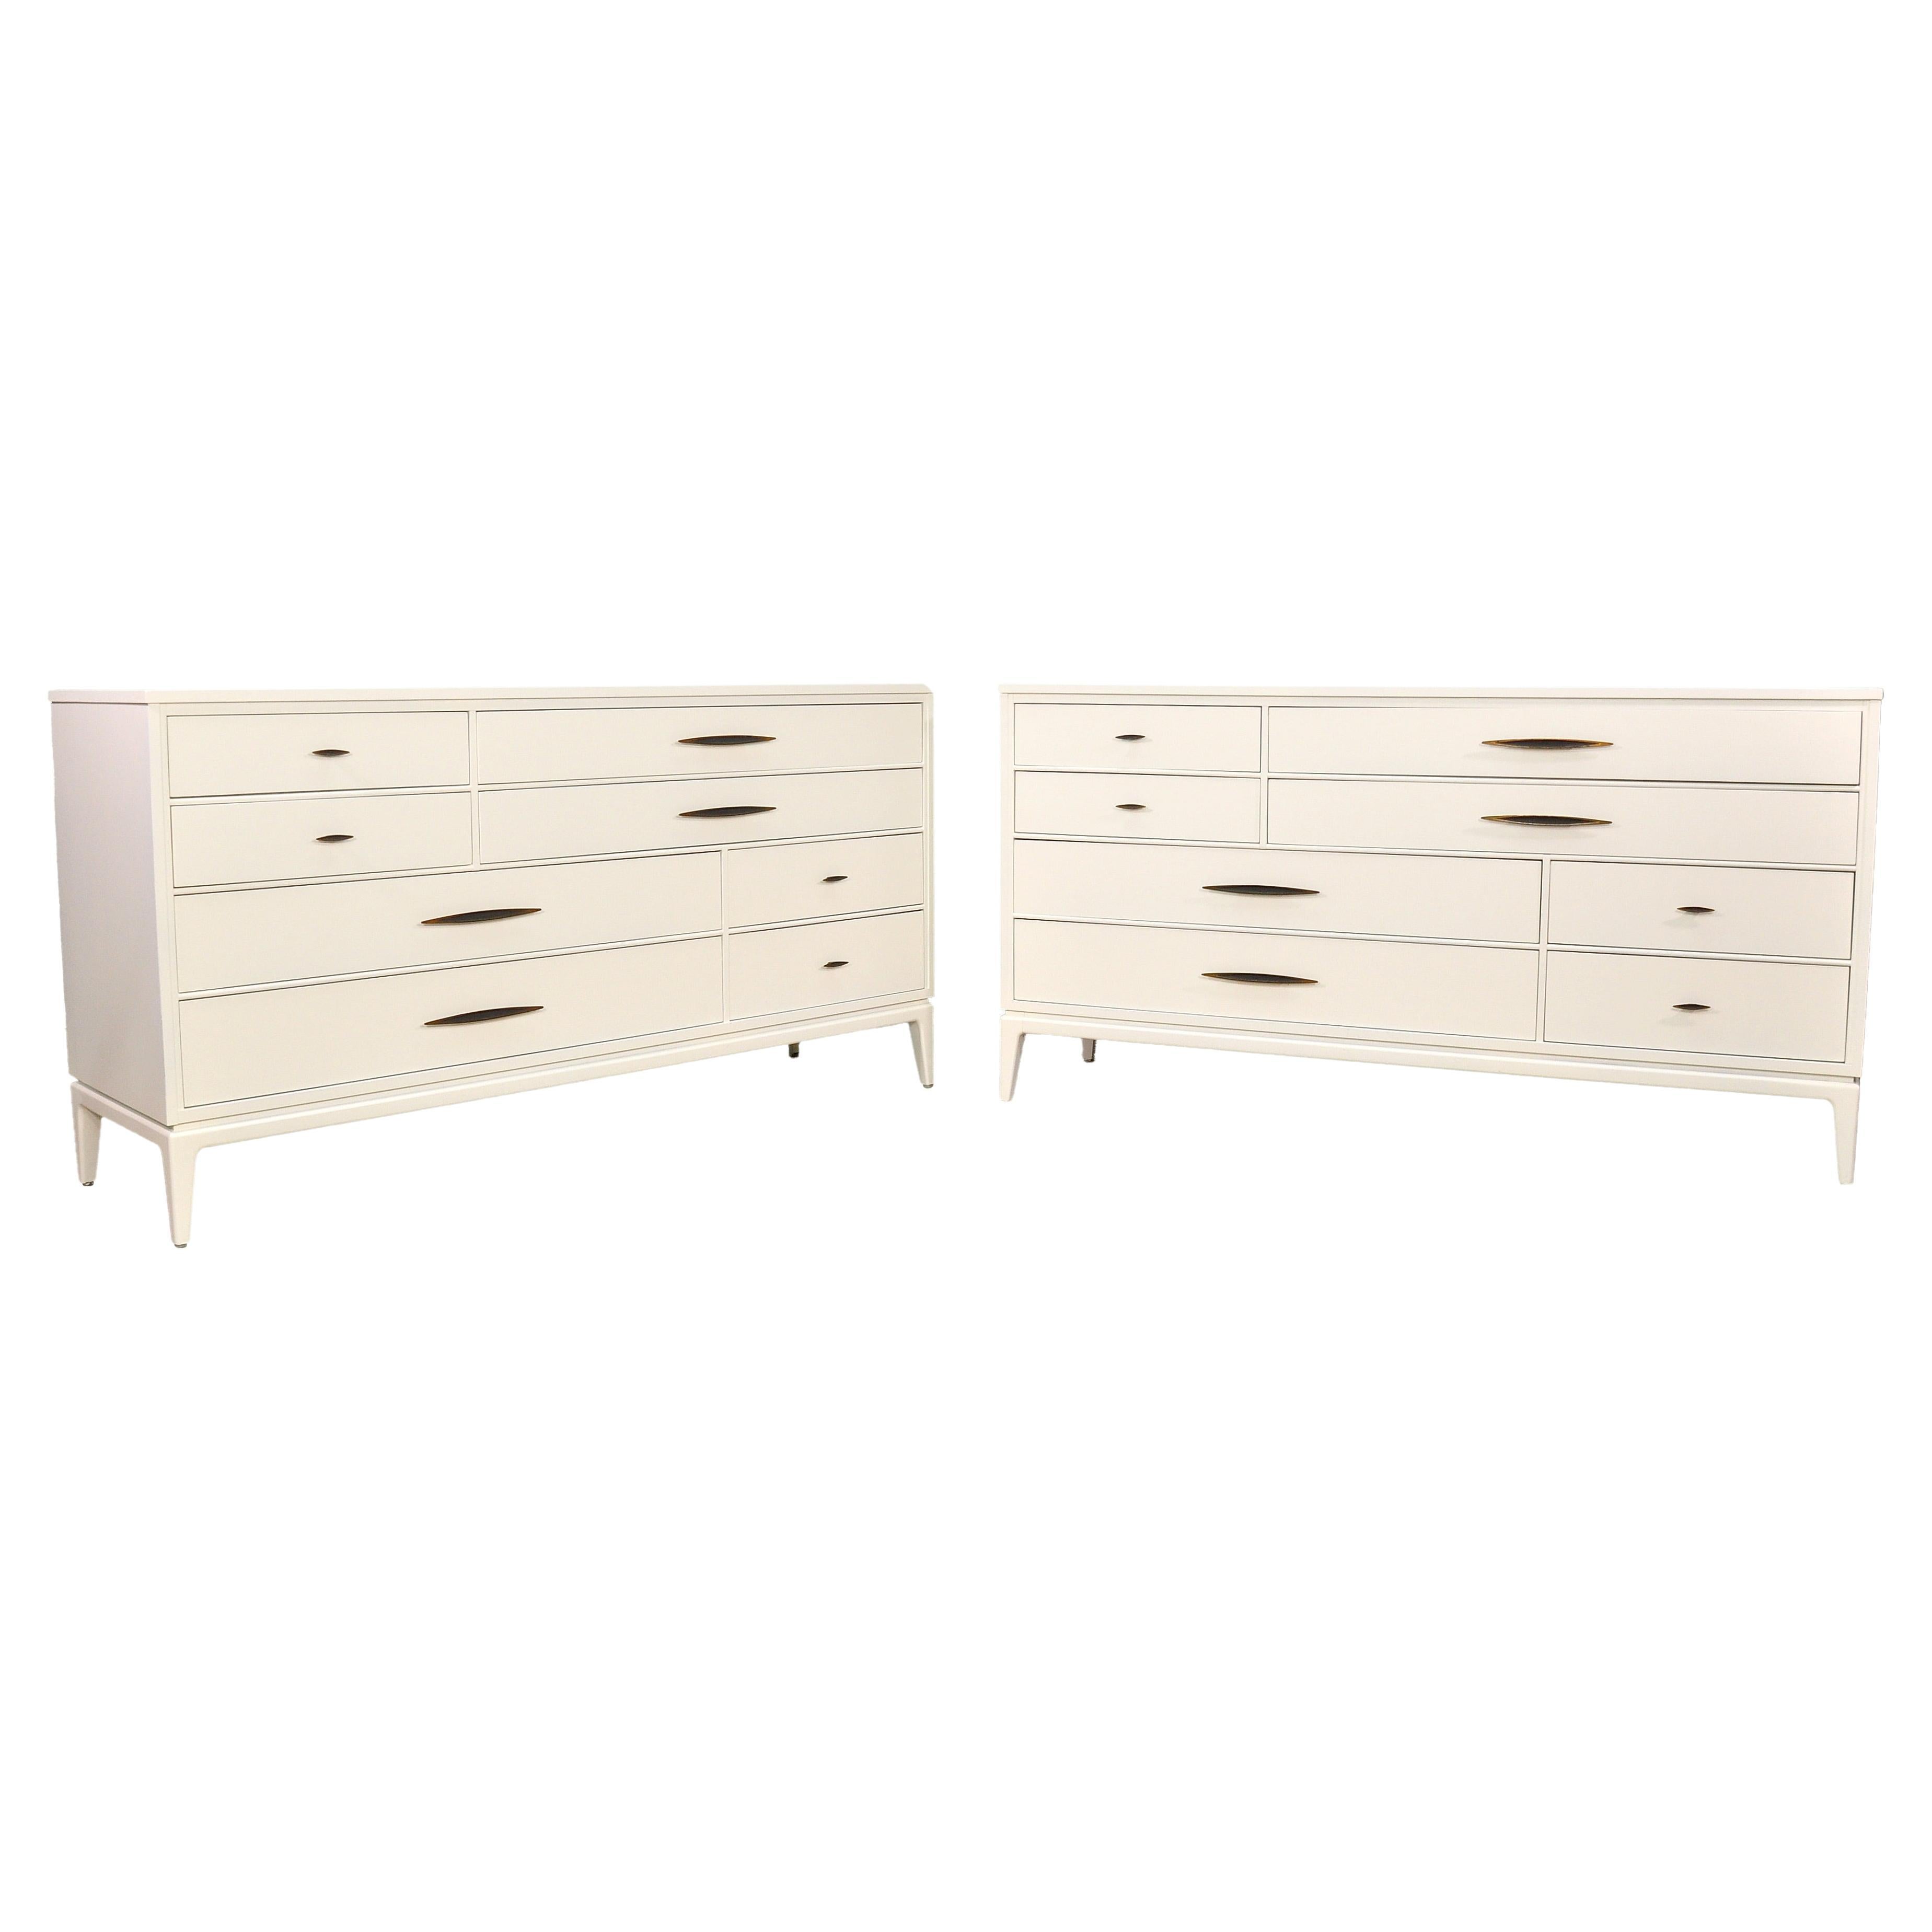 A solid walnut off-white lacquered midcentury modern dresser made by the Davis Cabinet Co. of Nashville, Tennessee. The light ivory cabinet features four (4) large and four (4) smaller drawers (some with dividers) with sleek brass and black faux